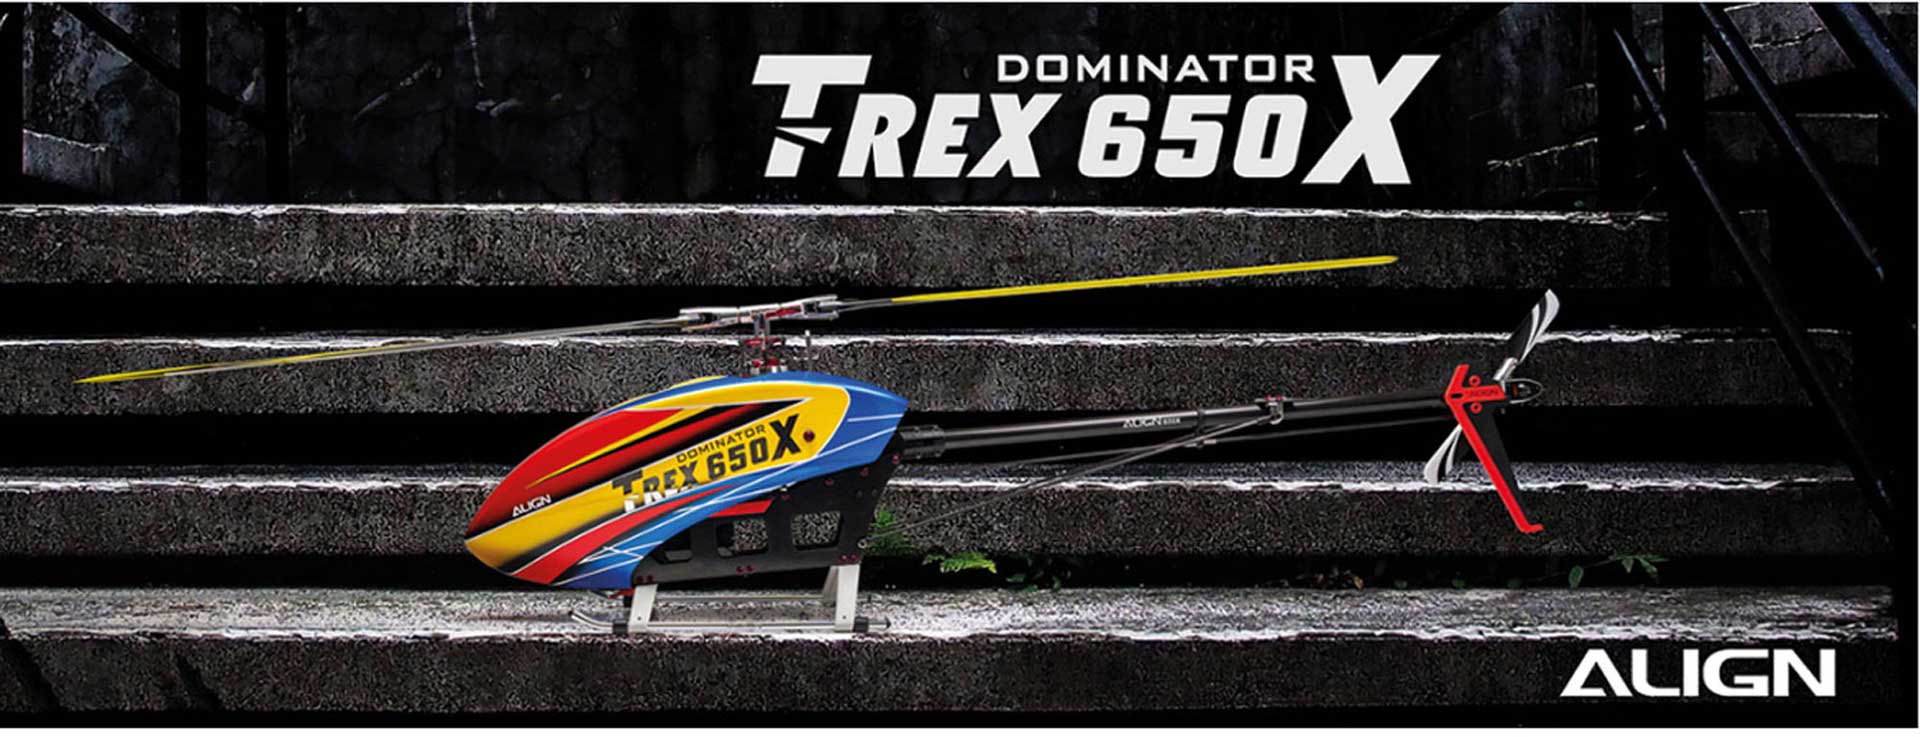 ALIGN T-REX 650X Dominator Super Combo RC Helicopter